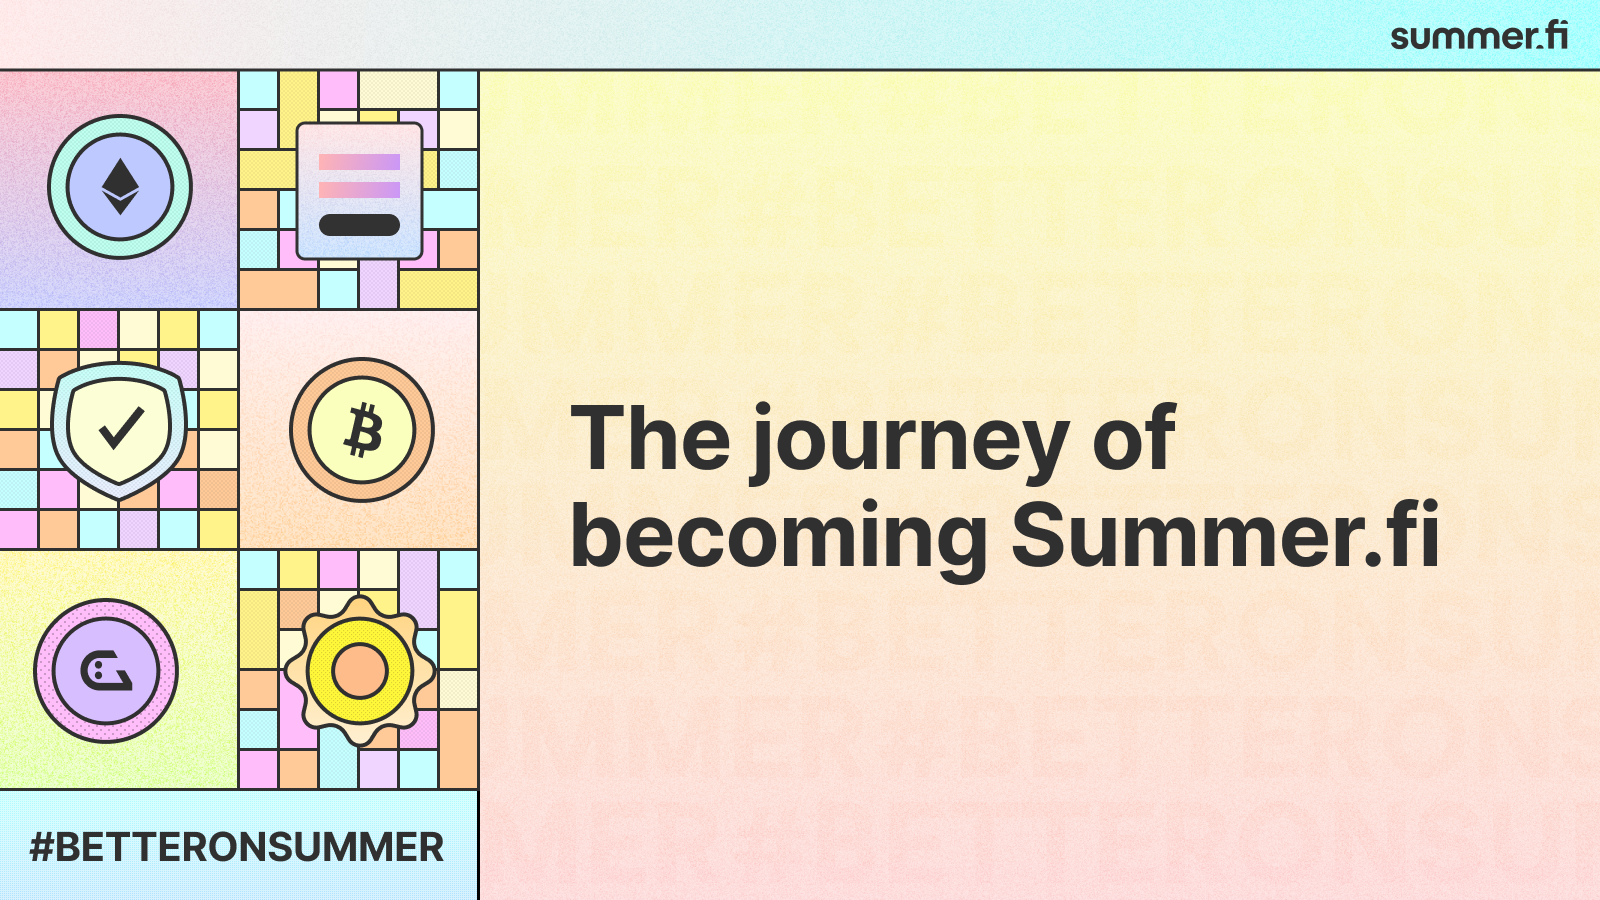 The journey of becoming Summer.fi